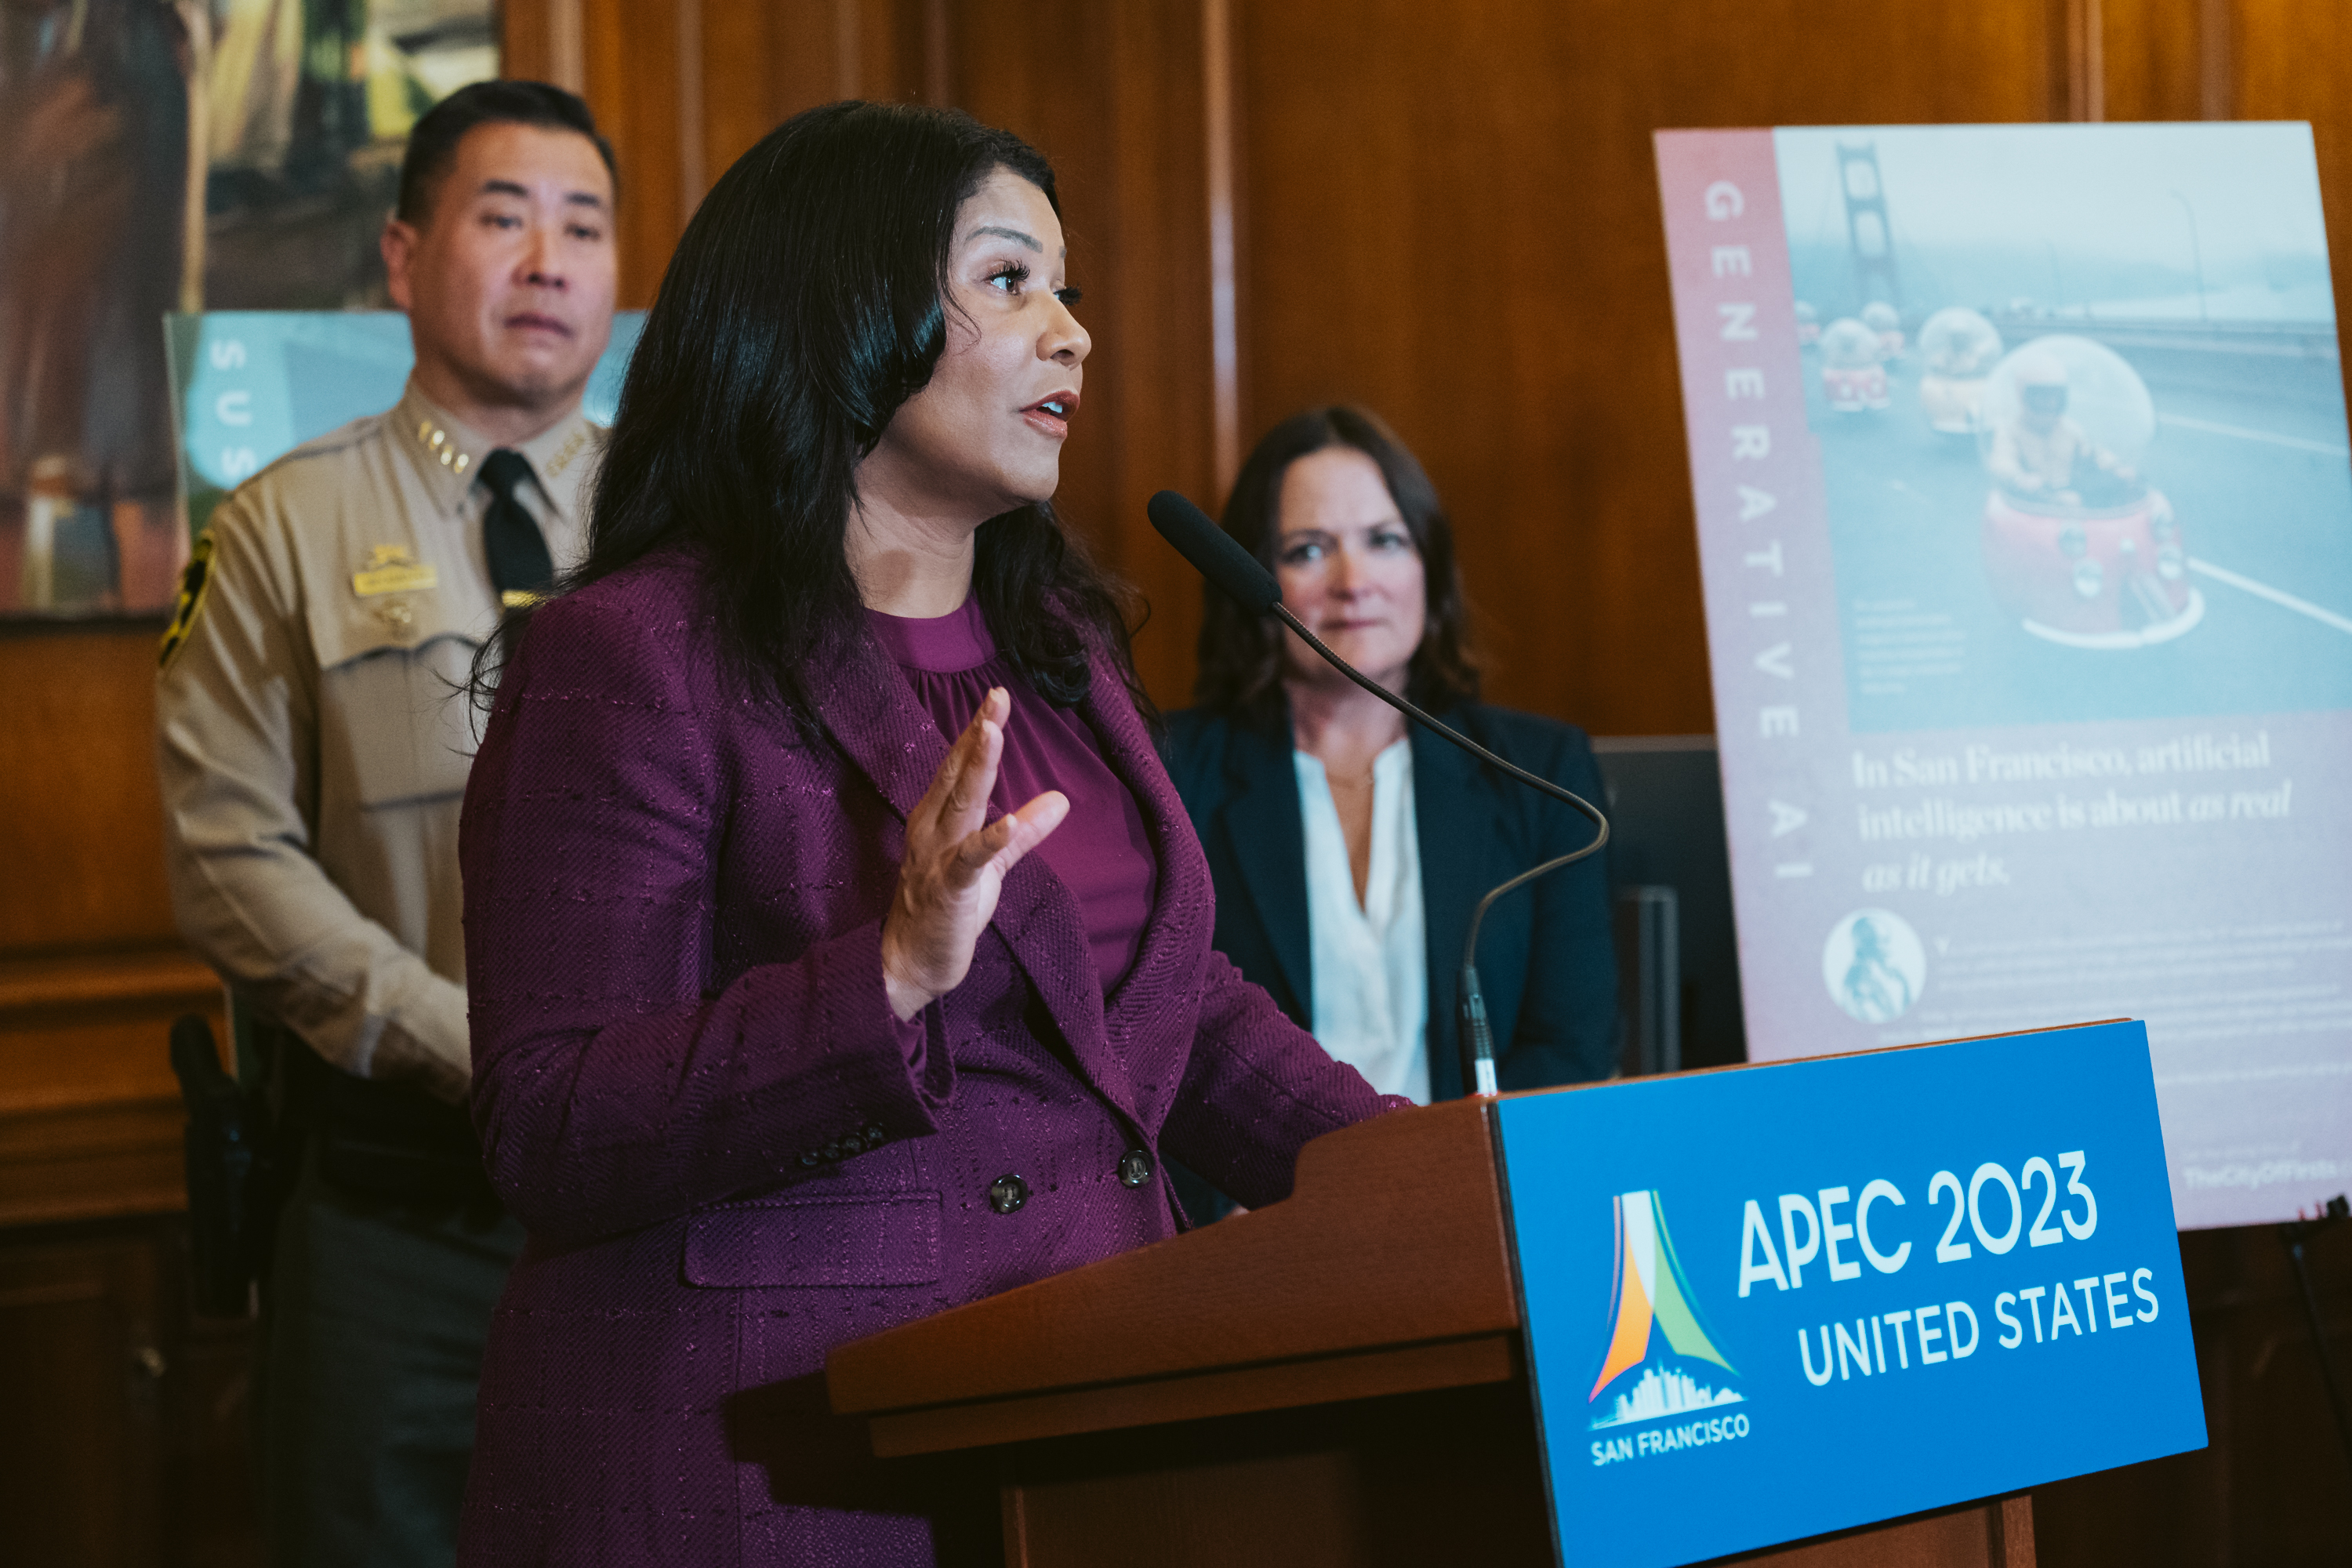 San Francisco Mayor London Breed, dressed in a purple suit raises her right hand while gesticulating as she speaks to the media during a press conference in City Hall. She sands behind a podium that reads &quot;APEC 2023 UNITED STATES&quot; in a wood paneled room with two other people standing behind her listening attentively.